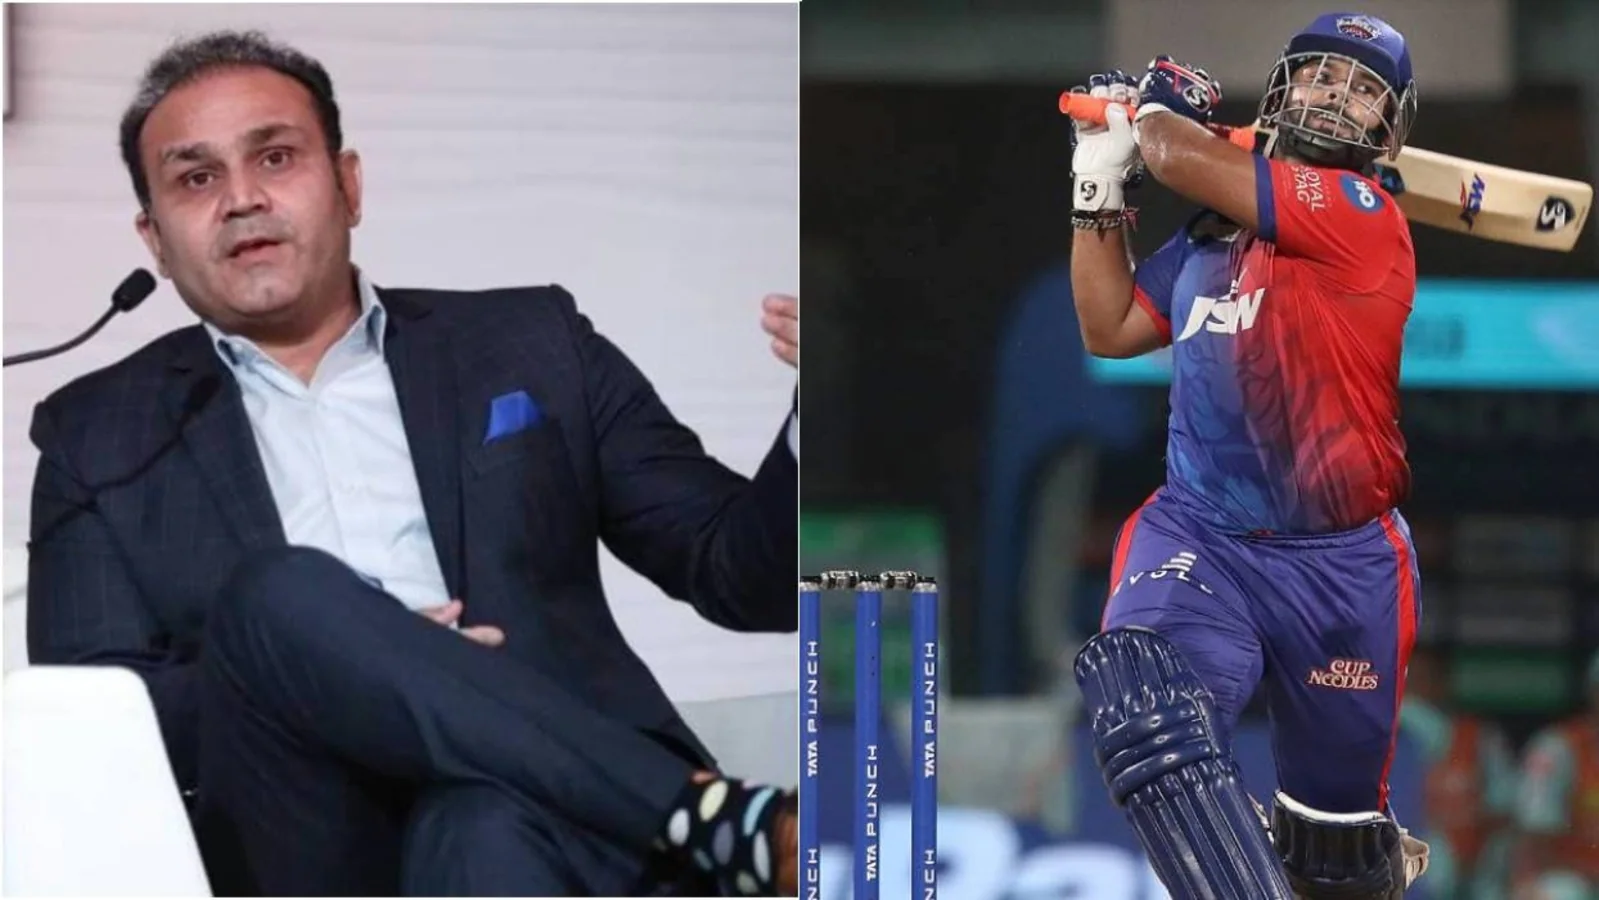 ‘He won’t have a successful IPL 2022 if he wants to play responsibly as captain’: Sehwag slams Pant’s batting in LSG tie